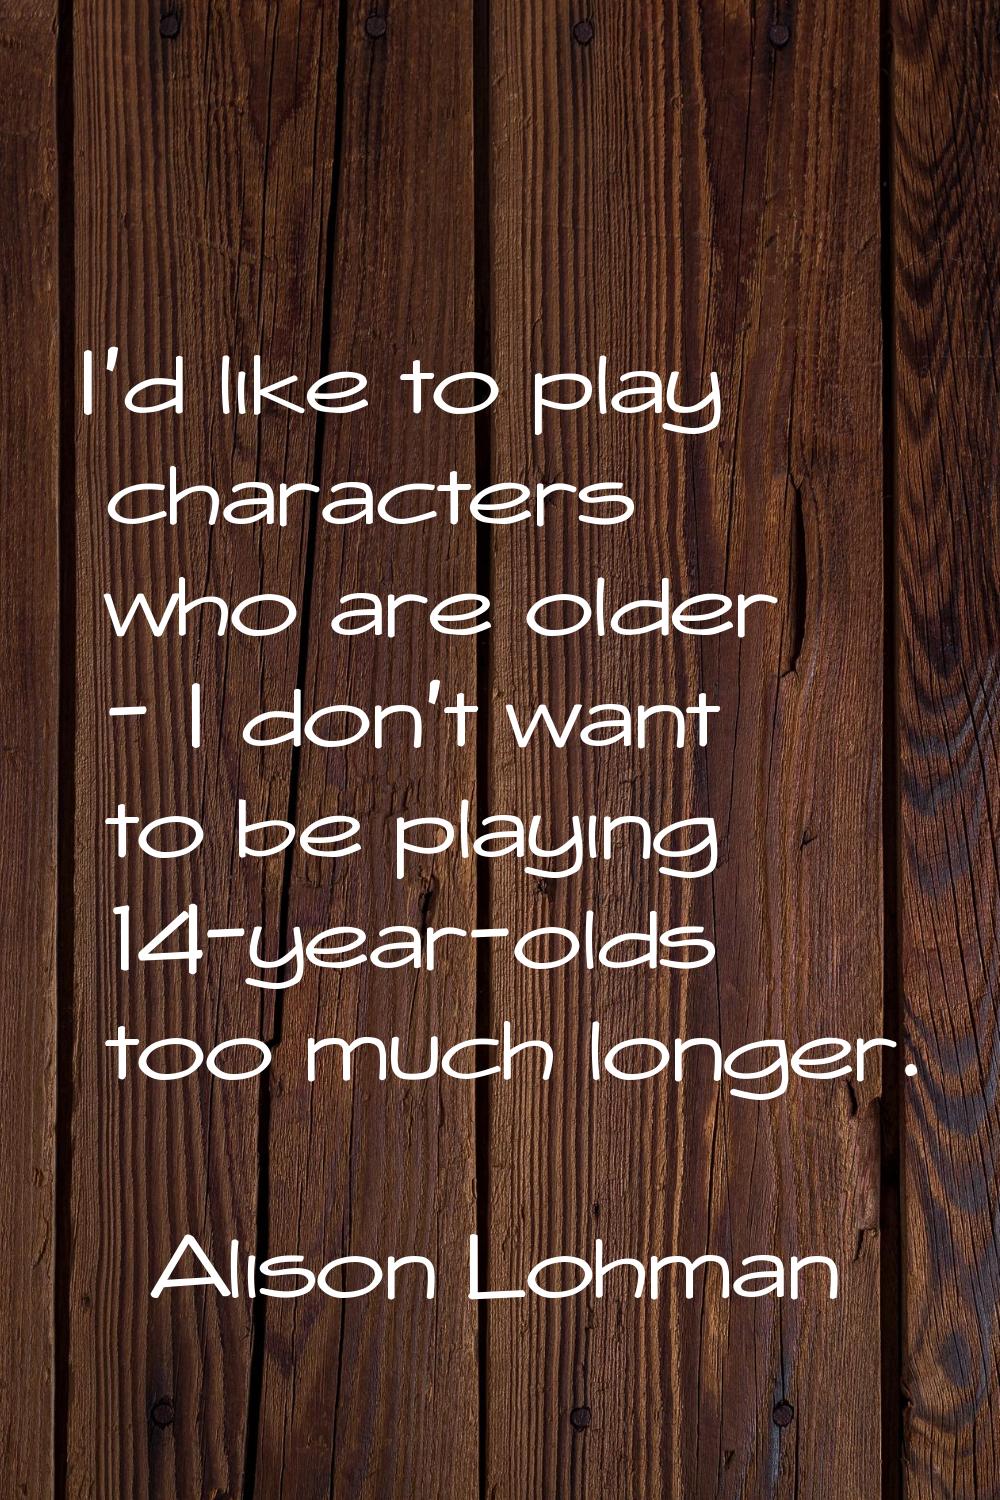 I'd like to play characters who are older - I don't want to be playing 14-year-olds too much longer